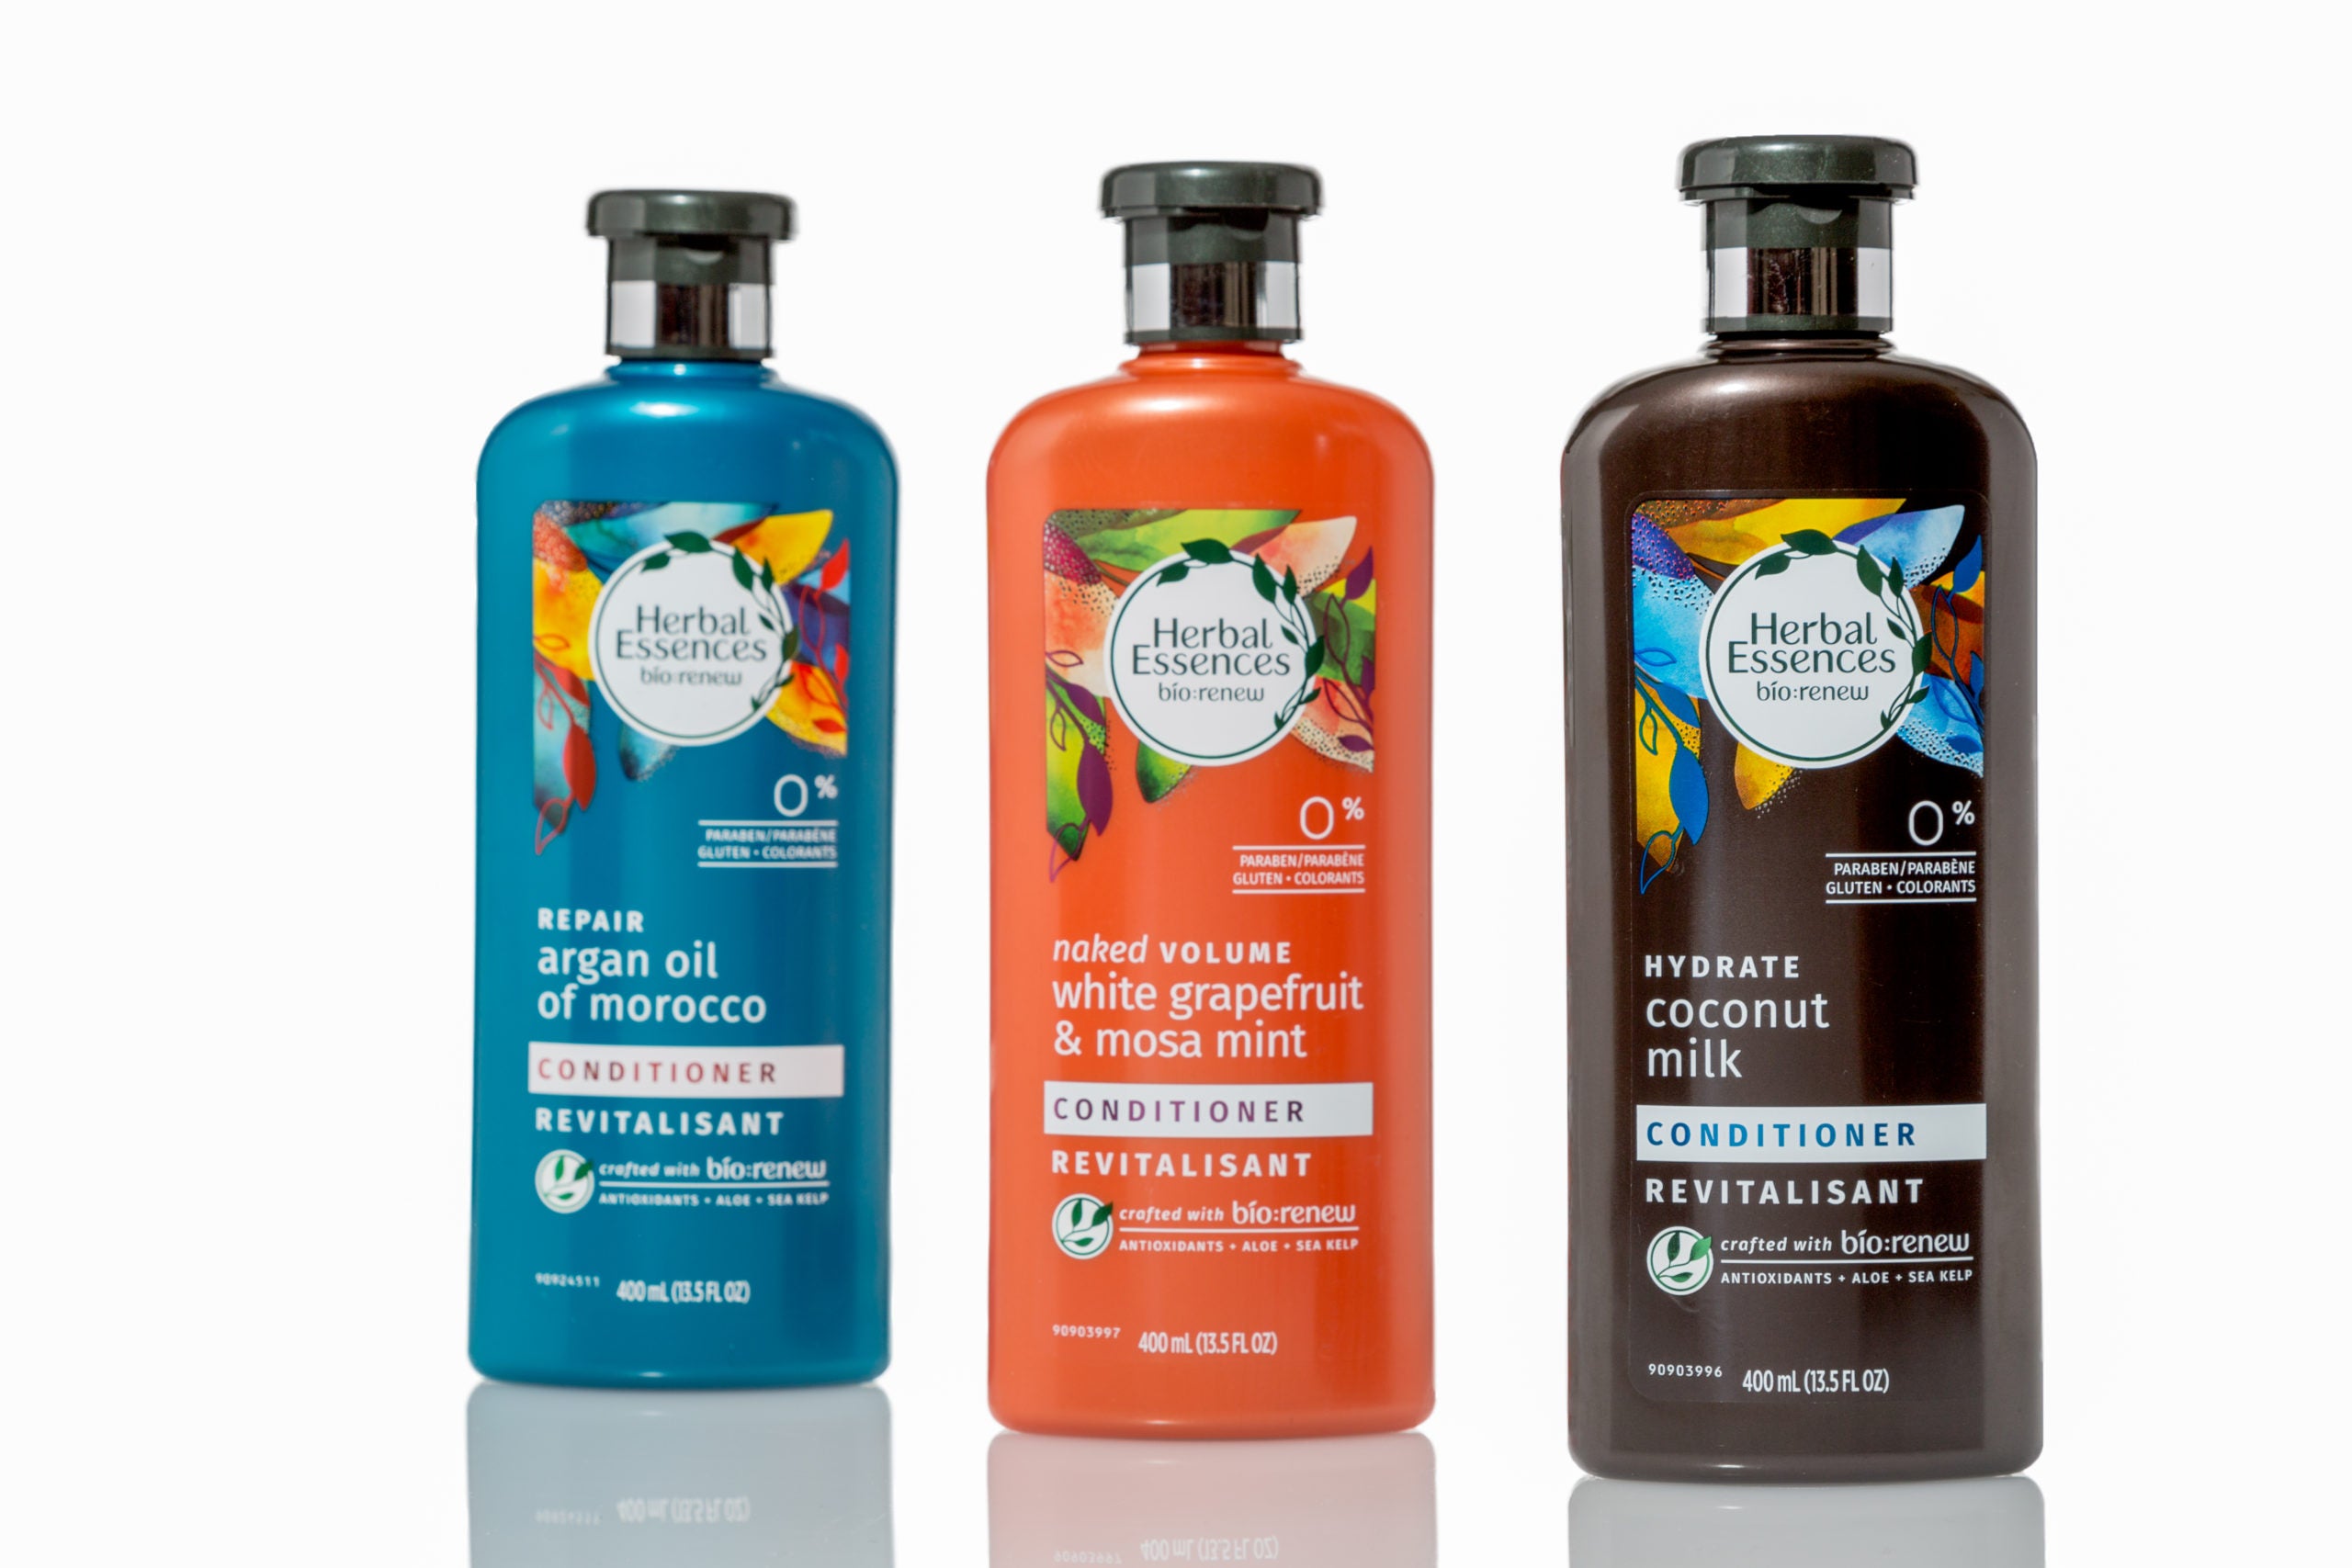 Review, Ingredients, Hairstyle Trend 2017, 2018: New Herbal Essences Collection, Shampoo, Conditioner, Hair Treatment, Styling Product